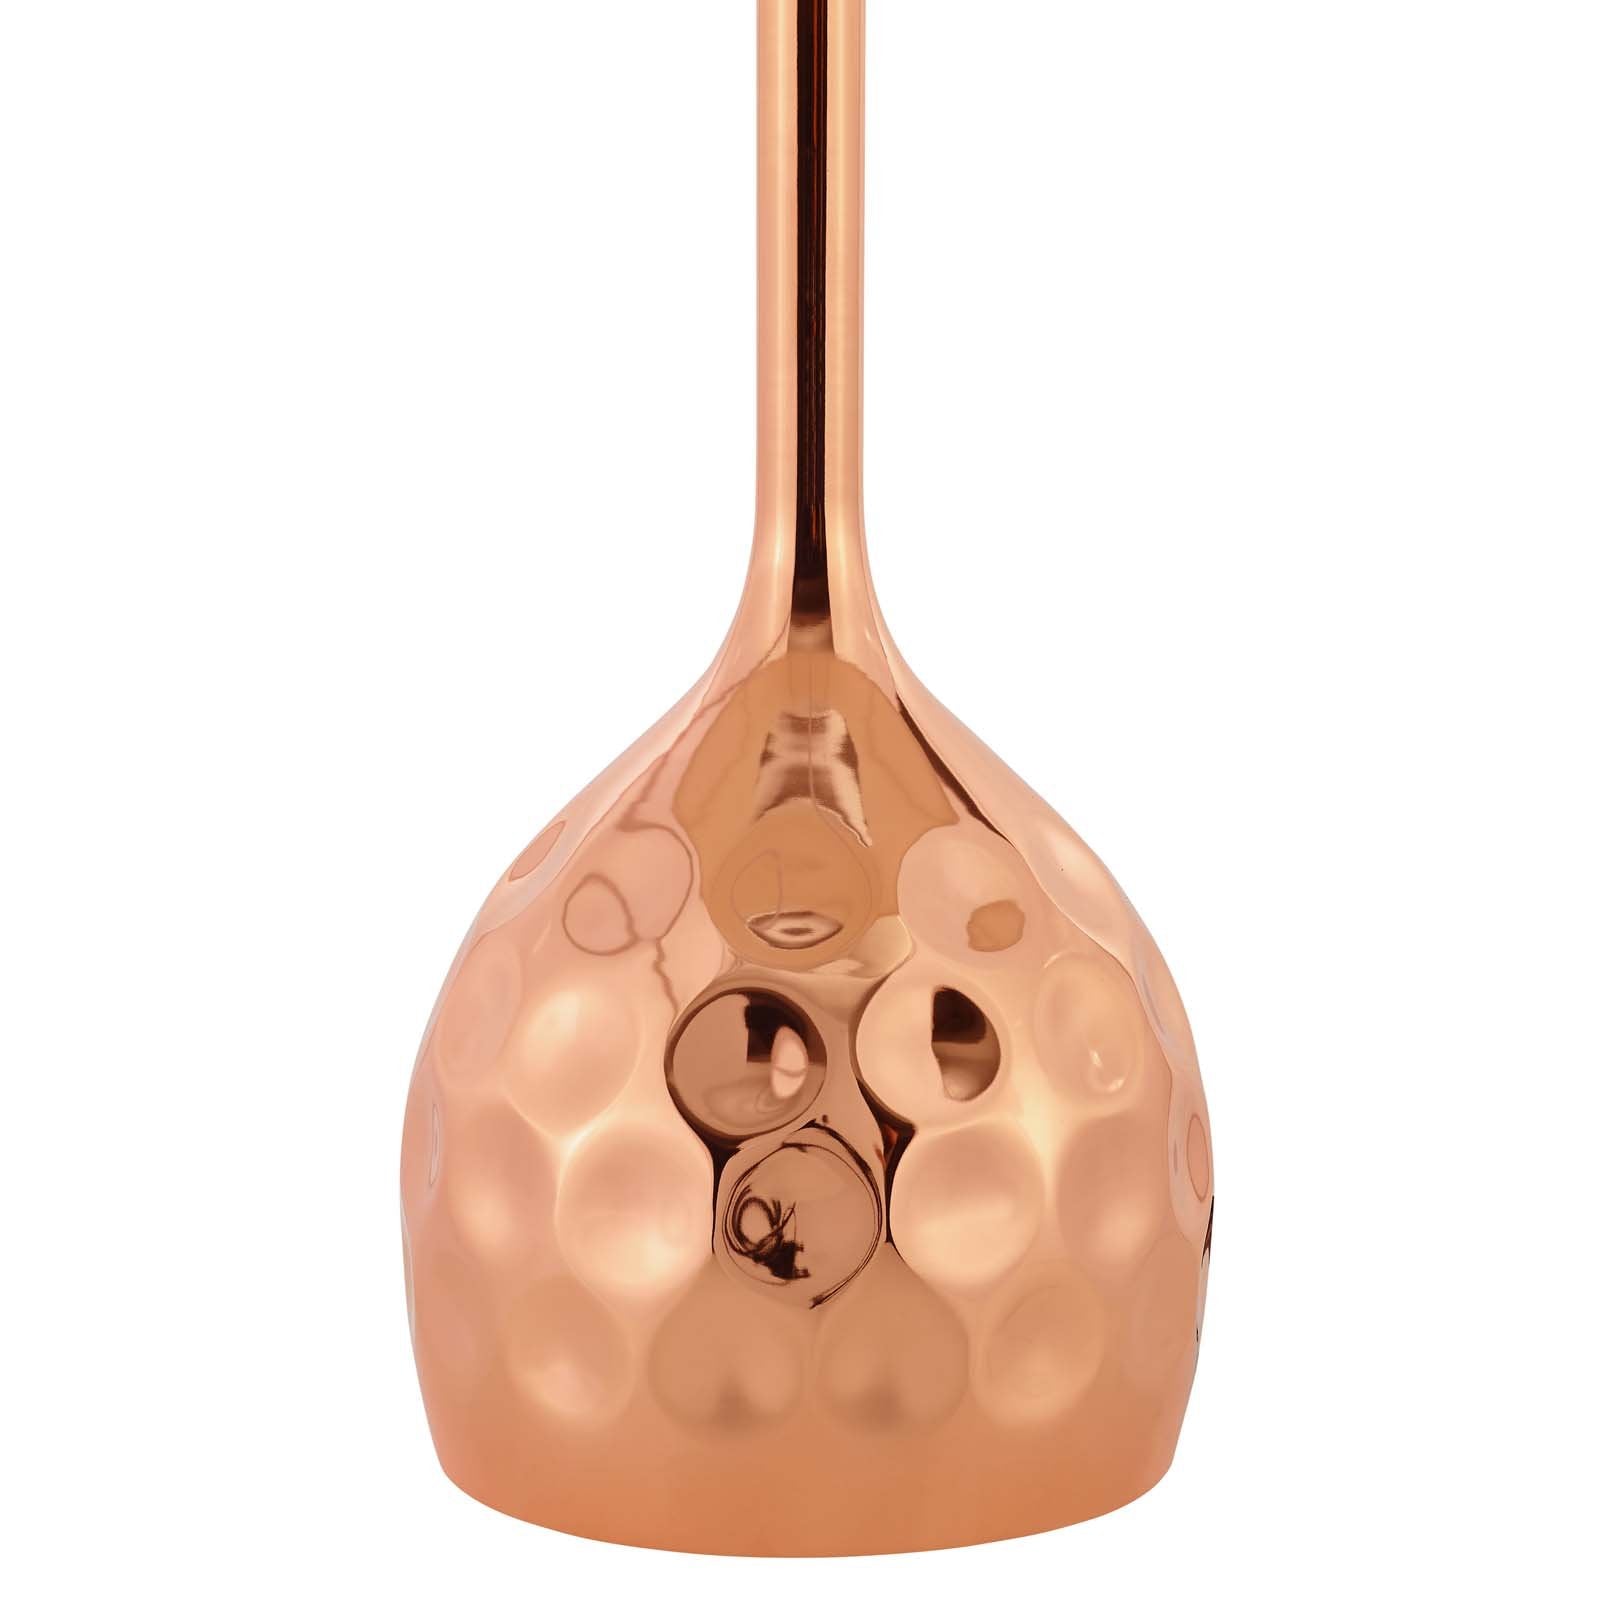 Dimple Rose Gold Table Lamp - East Shore Modern Home Furnishings